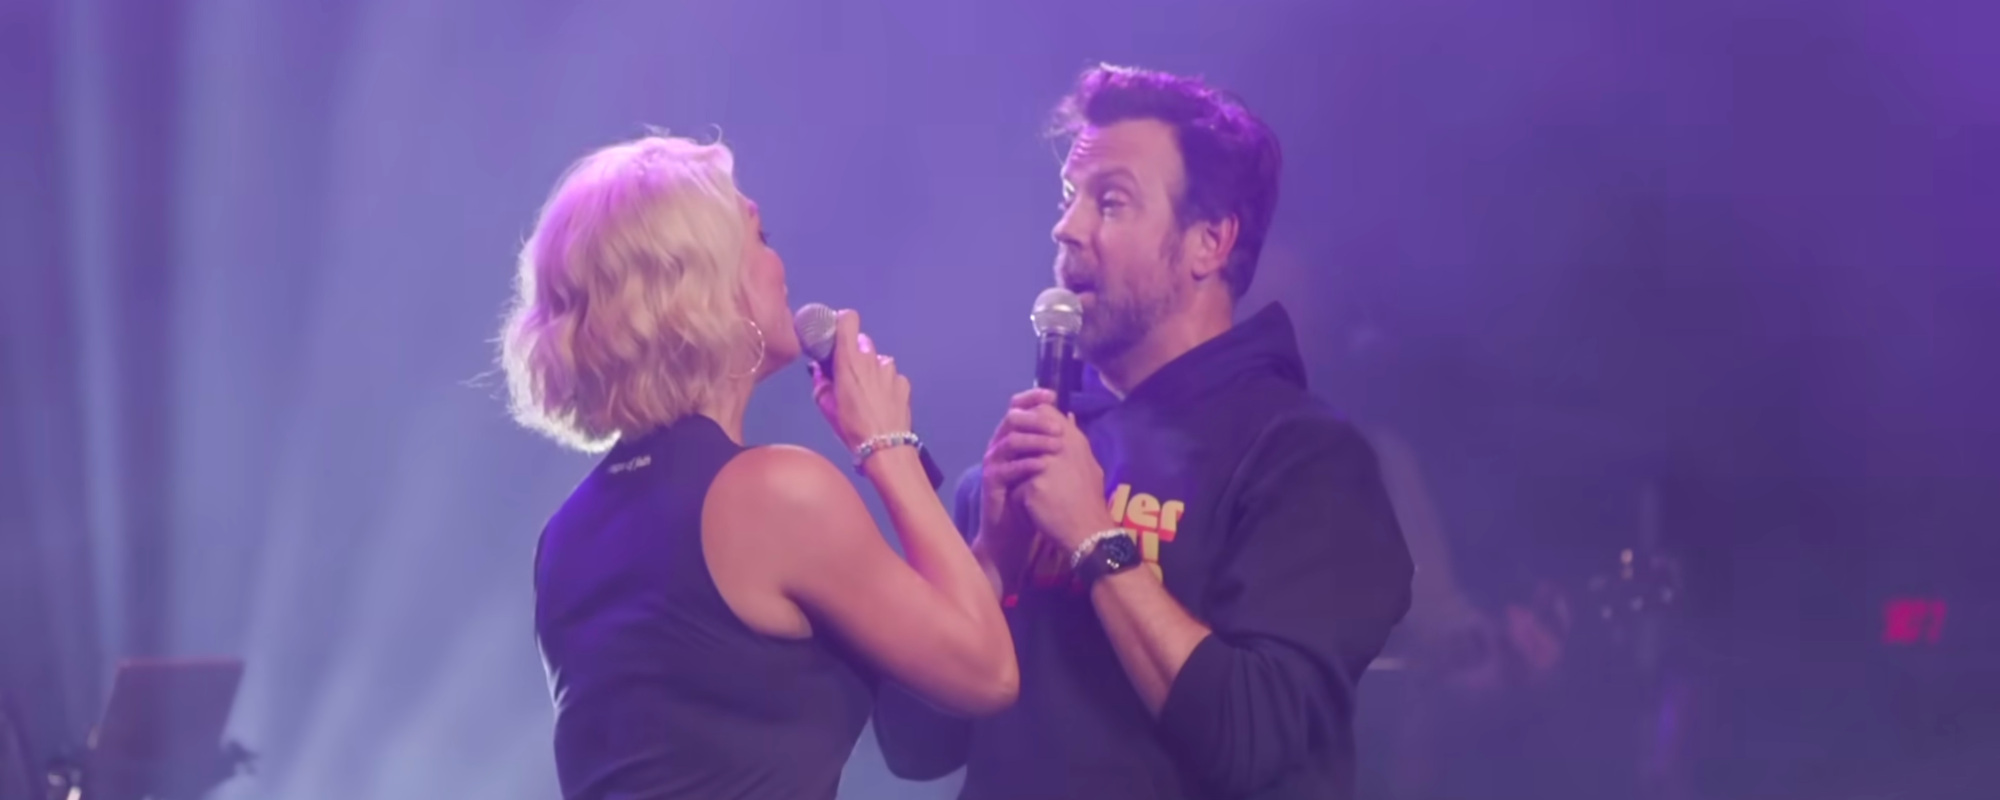 Watch: ‘Ted Lasso’ stars Jason Sudeikis and Hannah Waddingham Join Forces on Lady Gaga’s “Shallow”